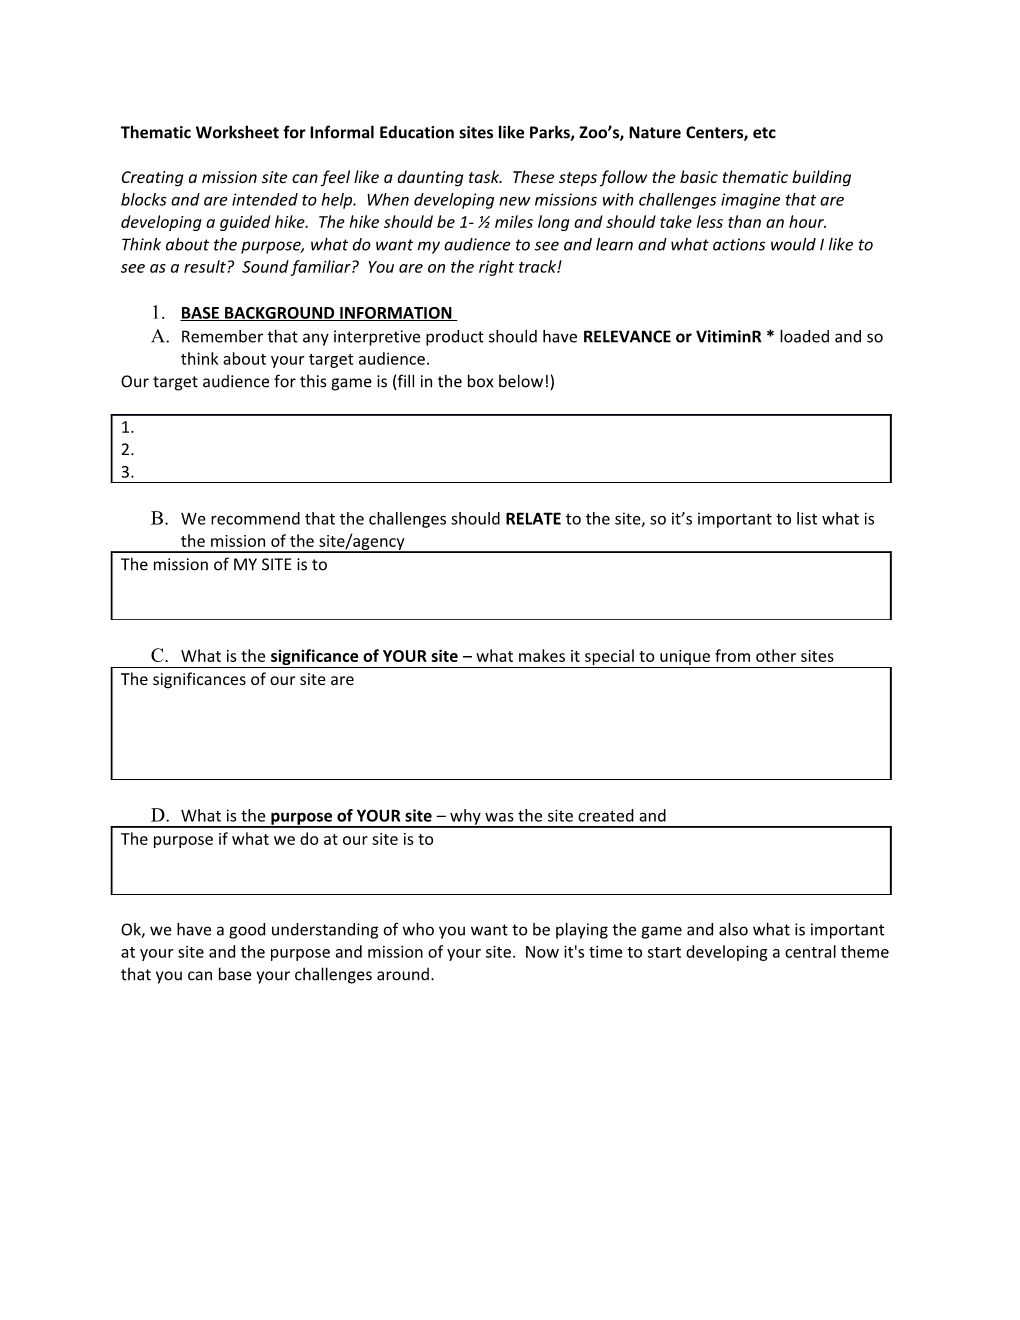 Thematic Worksheet for Informal Education Sites Like Parks, Zoo S, Nature Centers,Etc